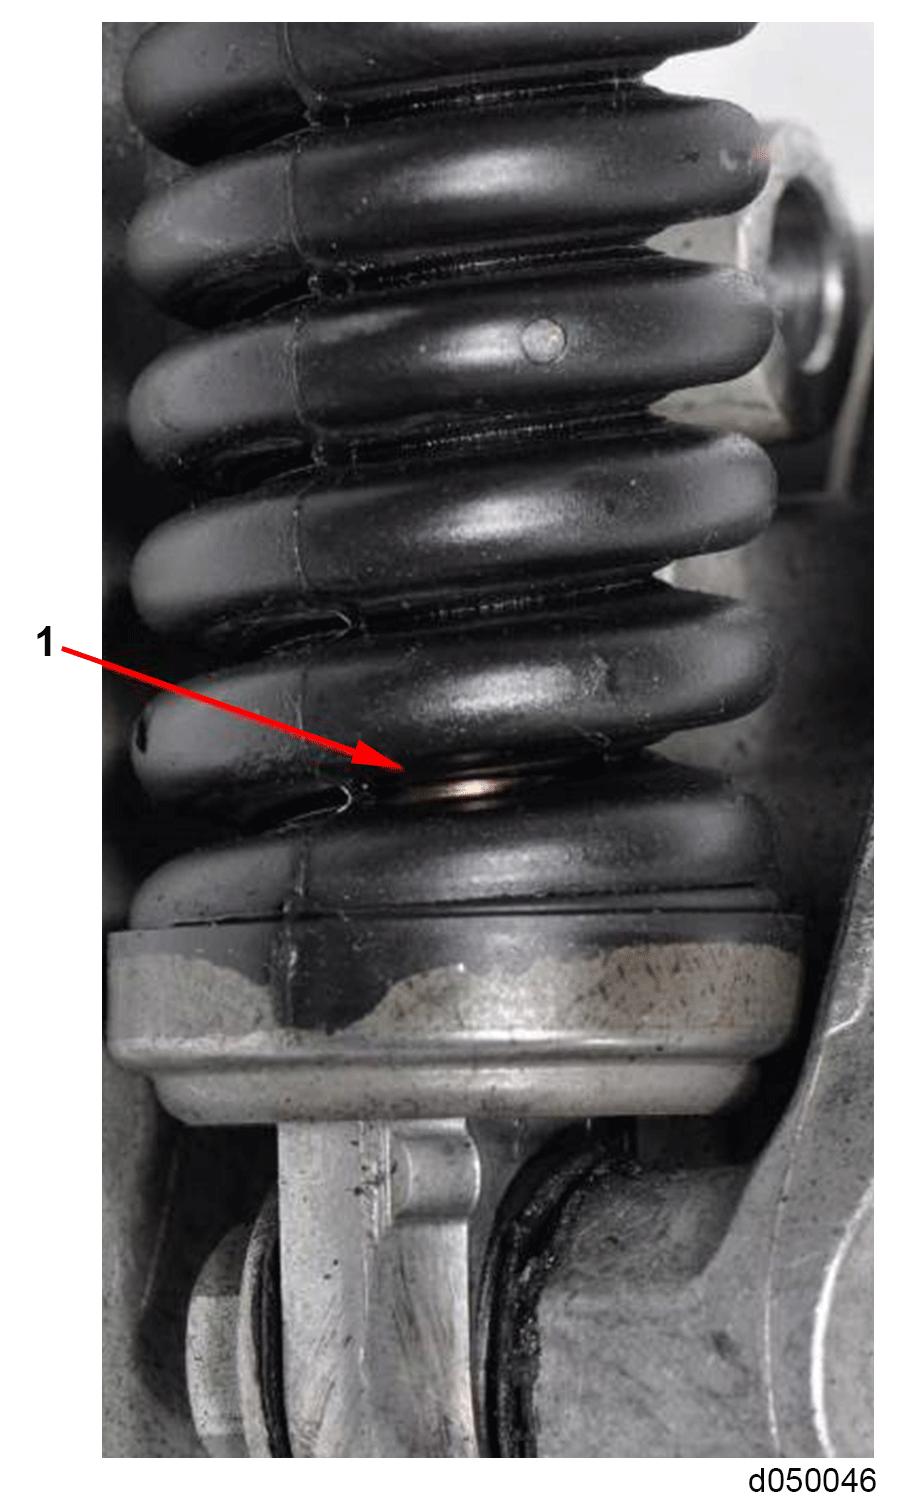 10 06-17 a. Yes; replace the belt tensioner and both belts. Refer to section "Removal of the Belt Tensioner". Verify repair. b. No; replace both belts.